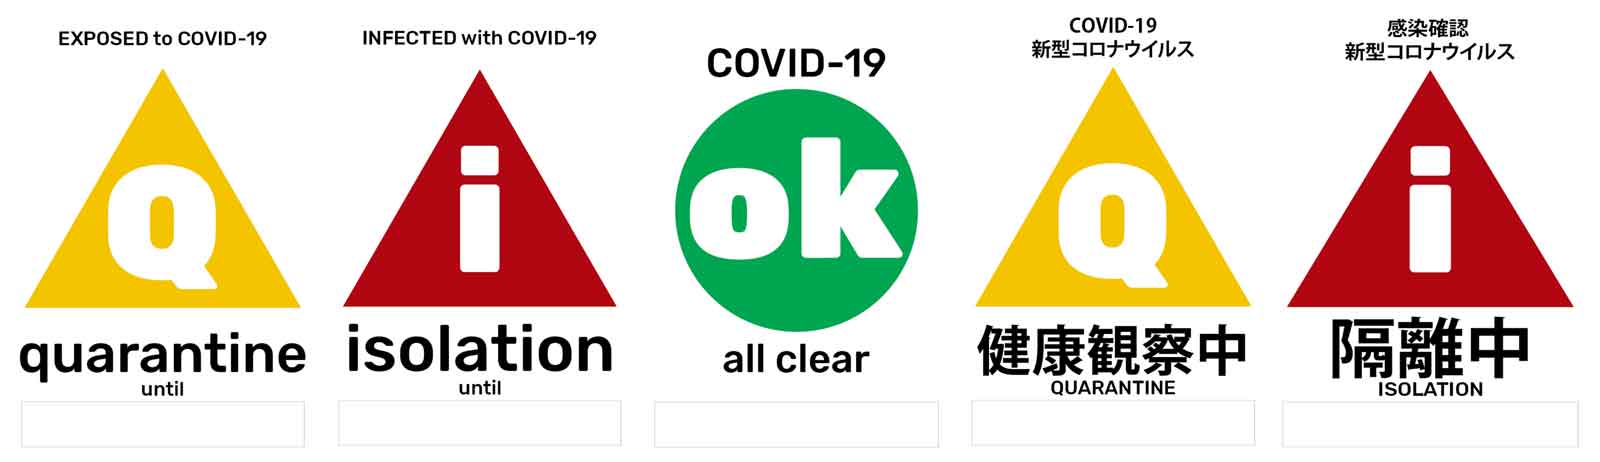 COVID-19 status posters: quarantine, isolation, all clear